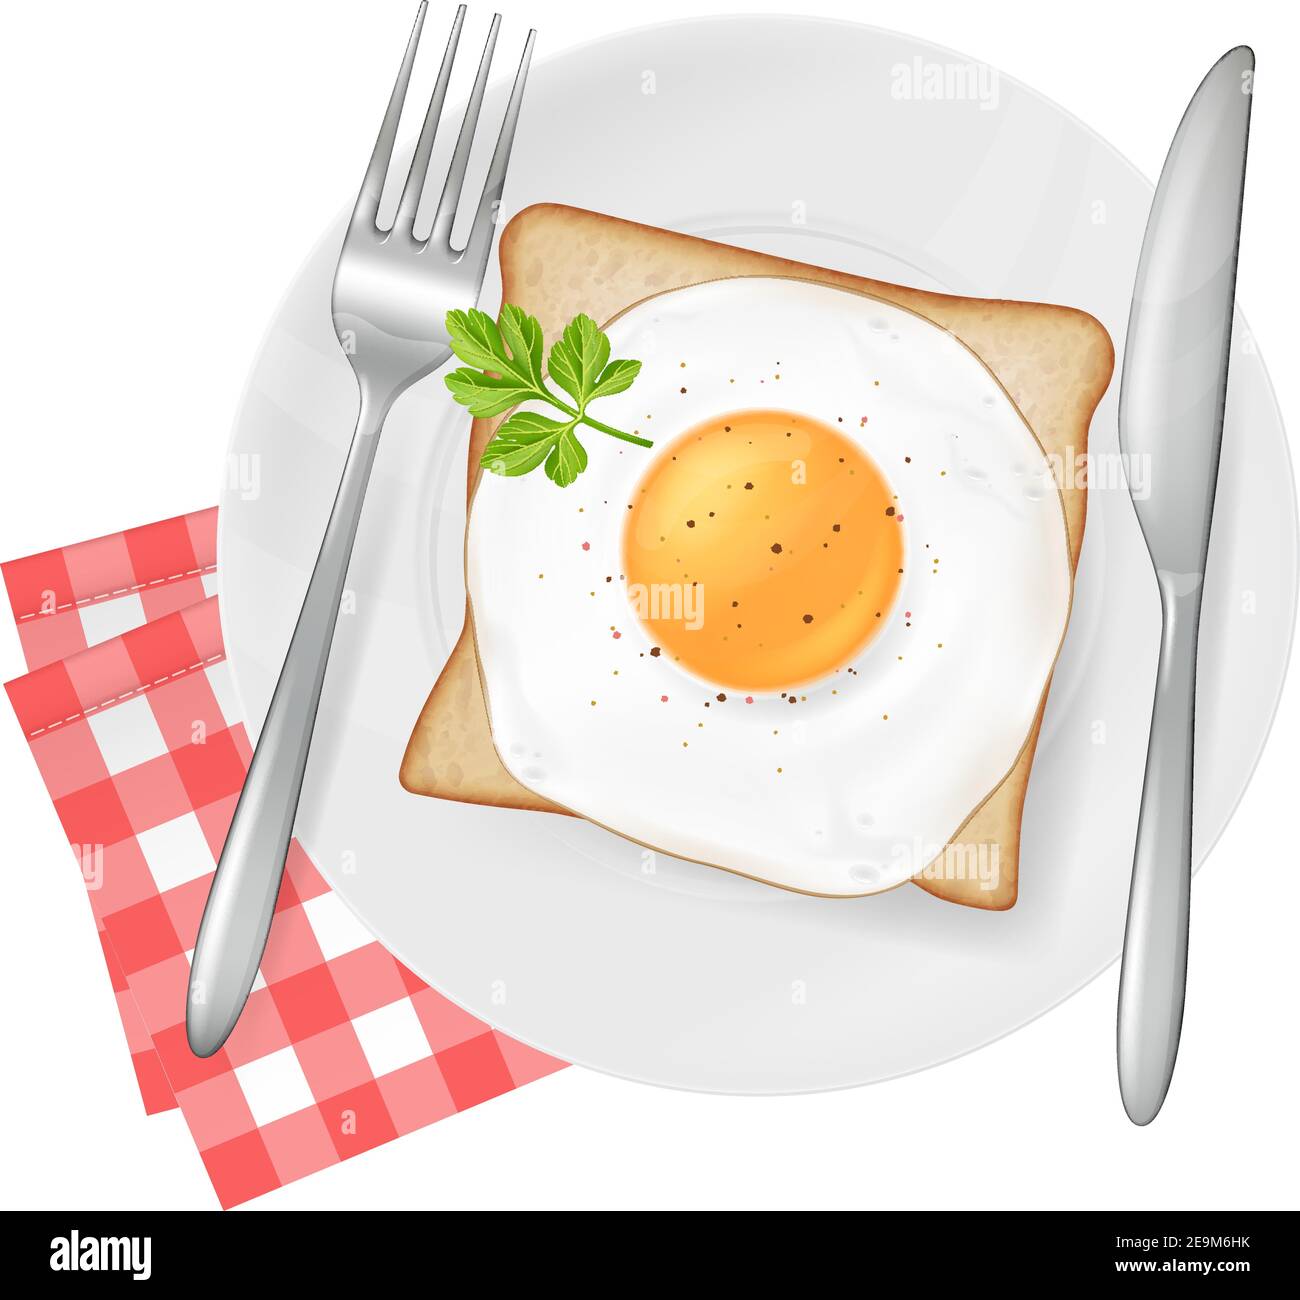 Fried egg on a toast, served on a white plate with fork and knife. Vector illustration. Stock Vector